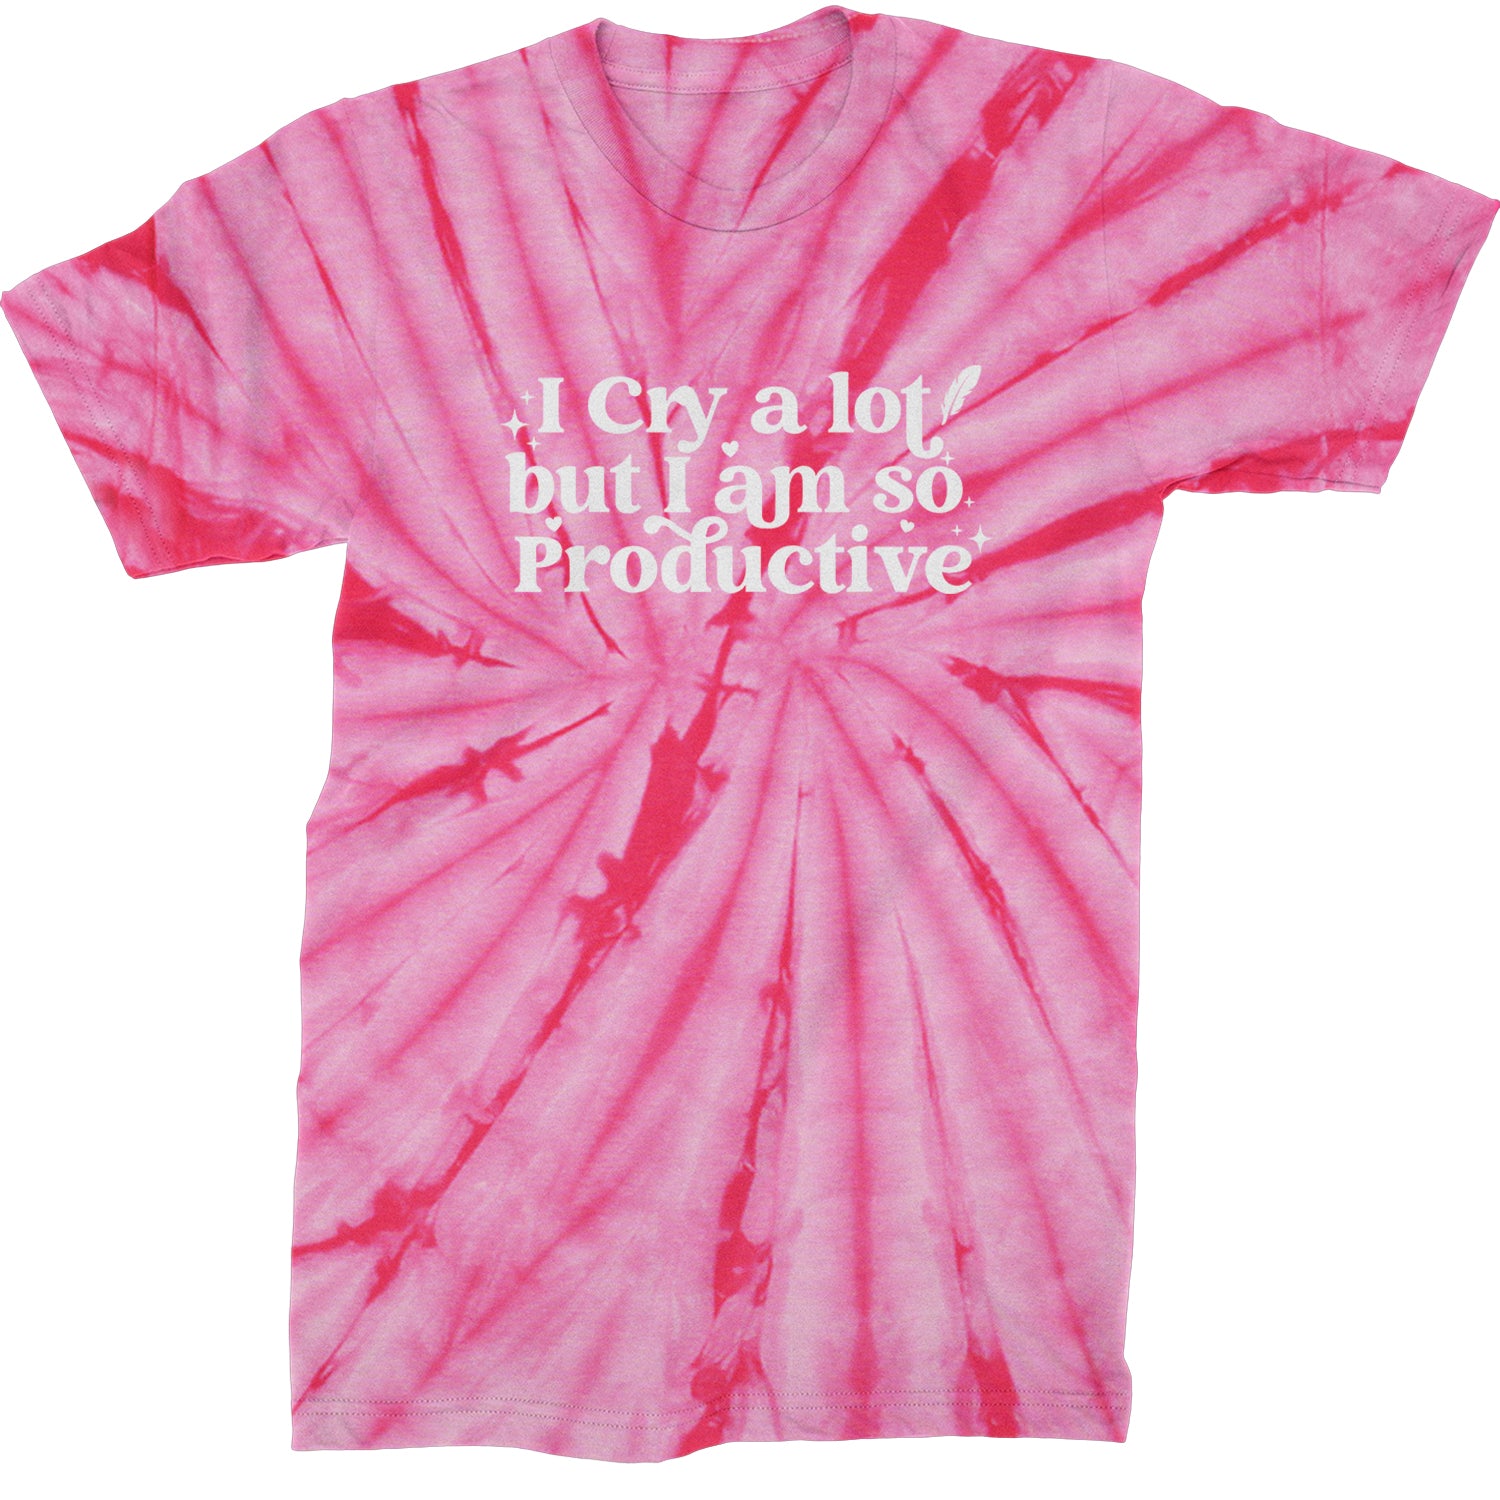 I Cry A Lot But I am So Productive TTPD Mens T-shirt Tie-Dye Spider Pink